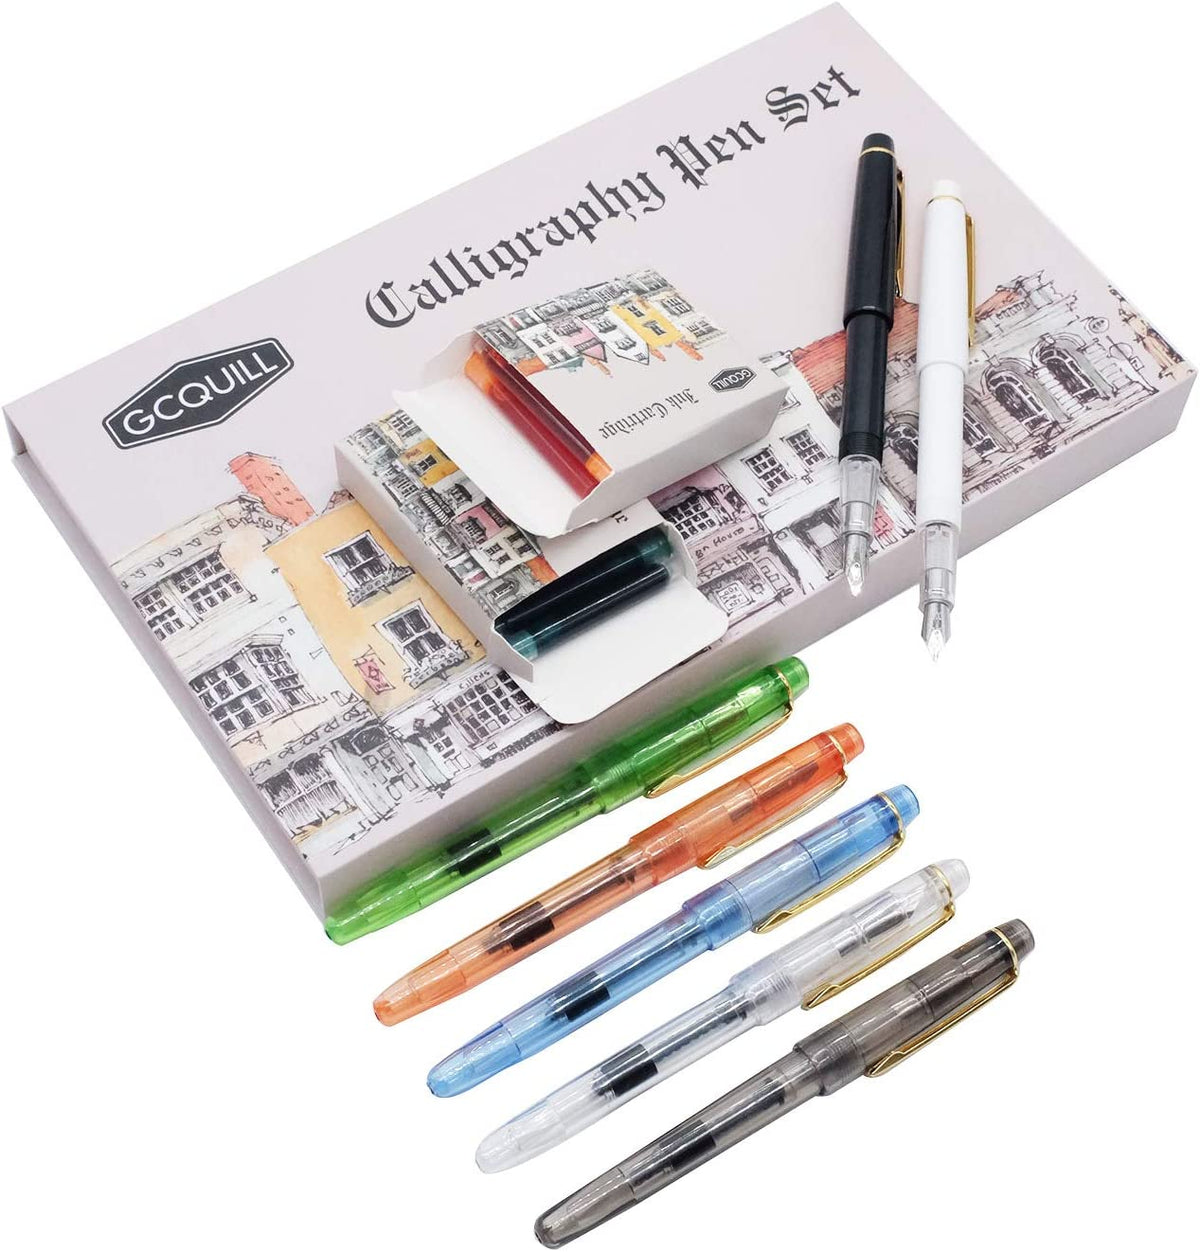 Fountain Pen Set 7 Different Size Nibs and 36 Assorted Ink Cartridges Kit for Calligraphy Lettering - Complete Easy Learning Set for Beginners